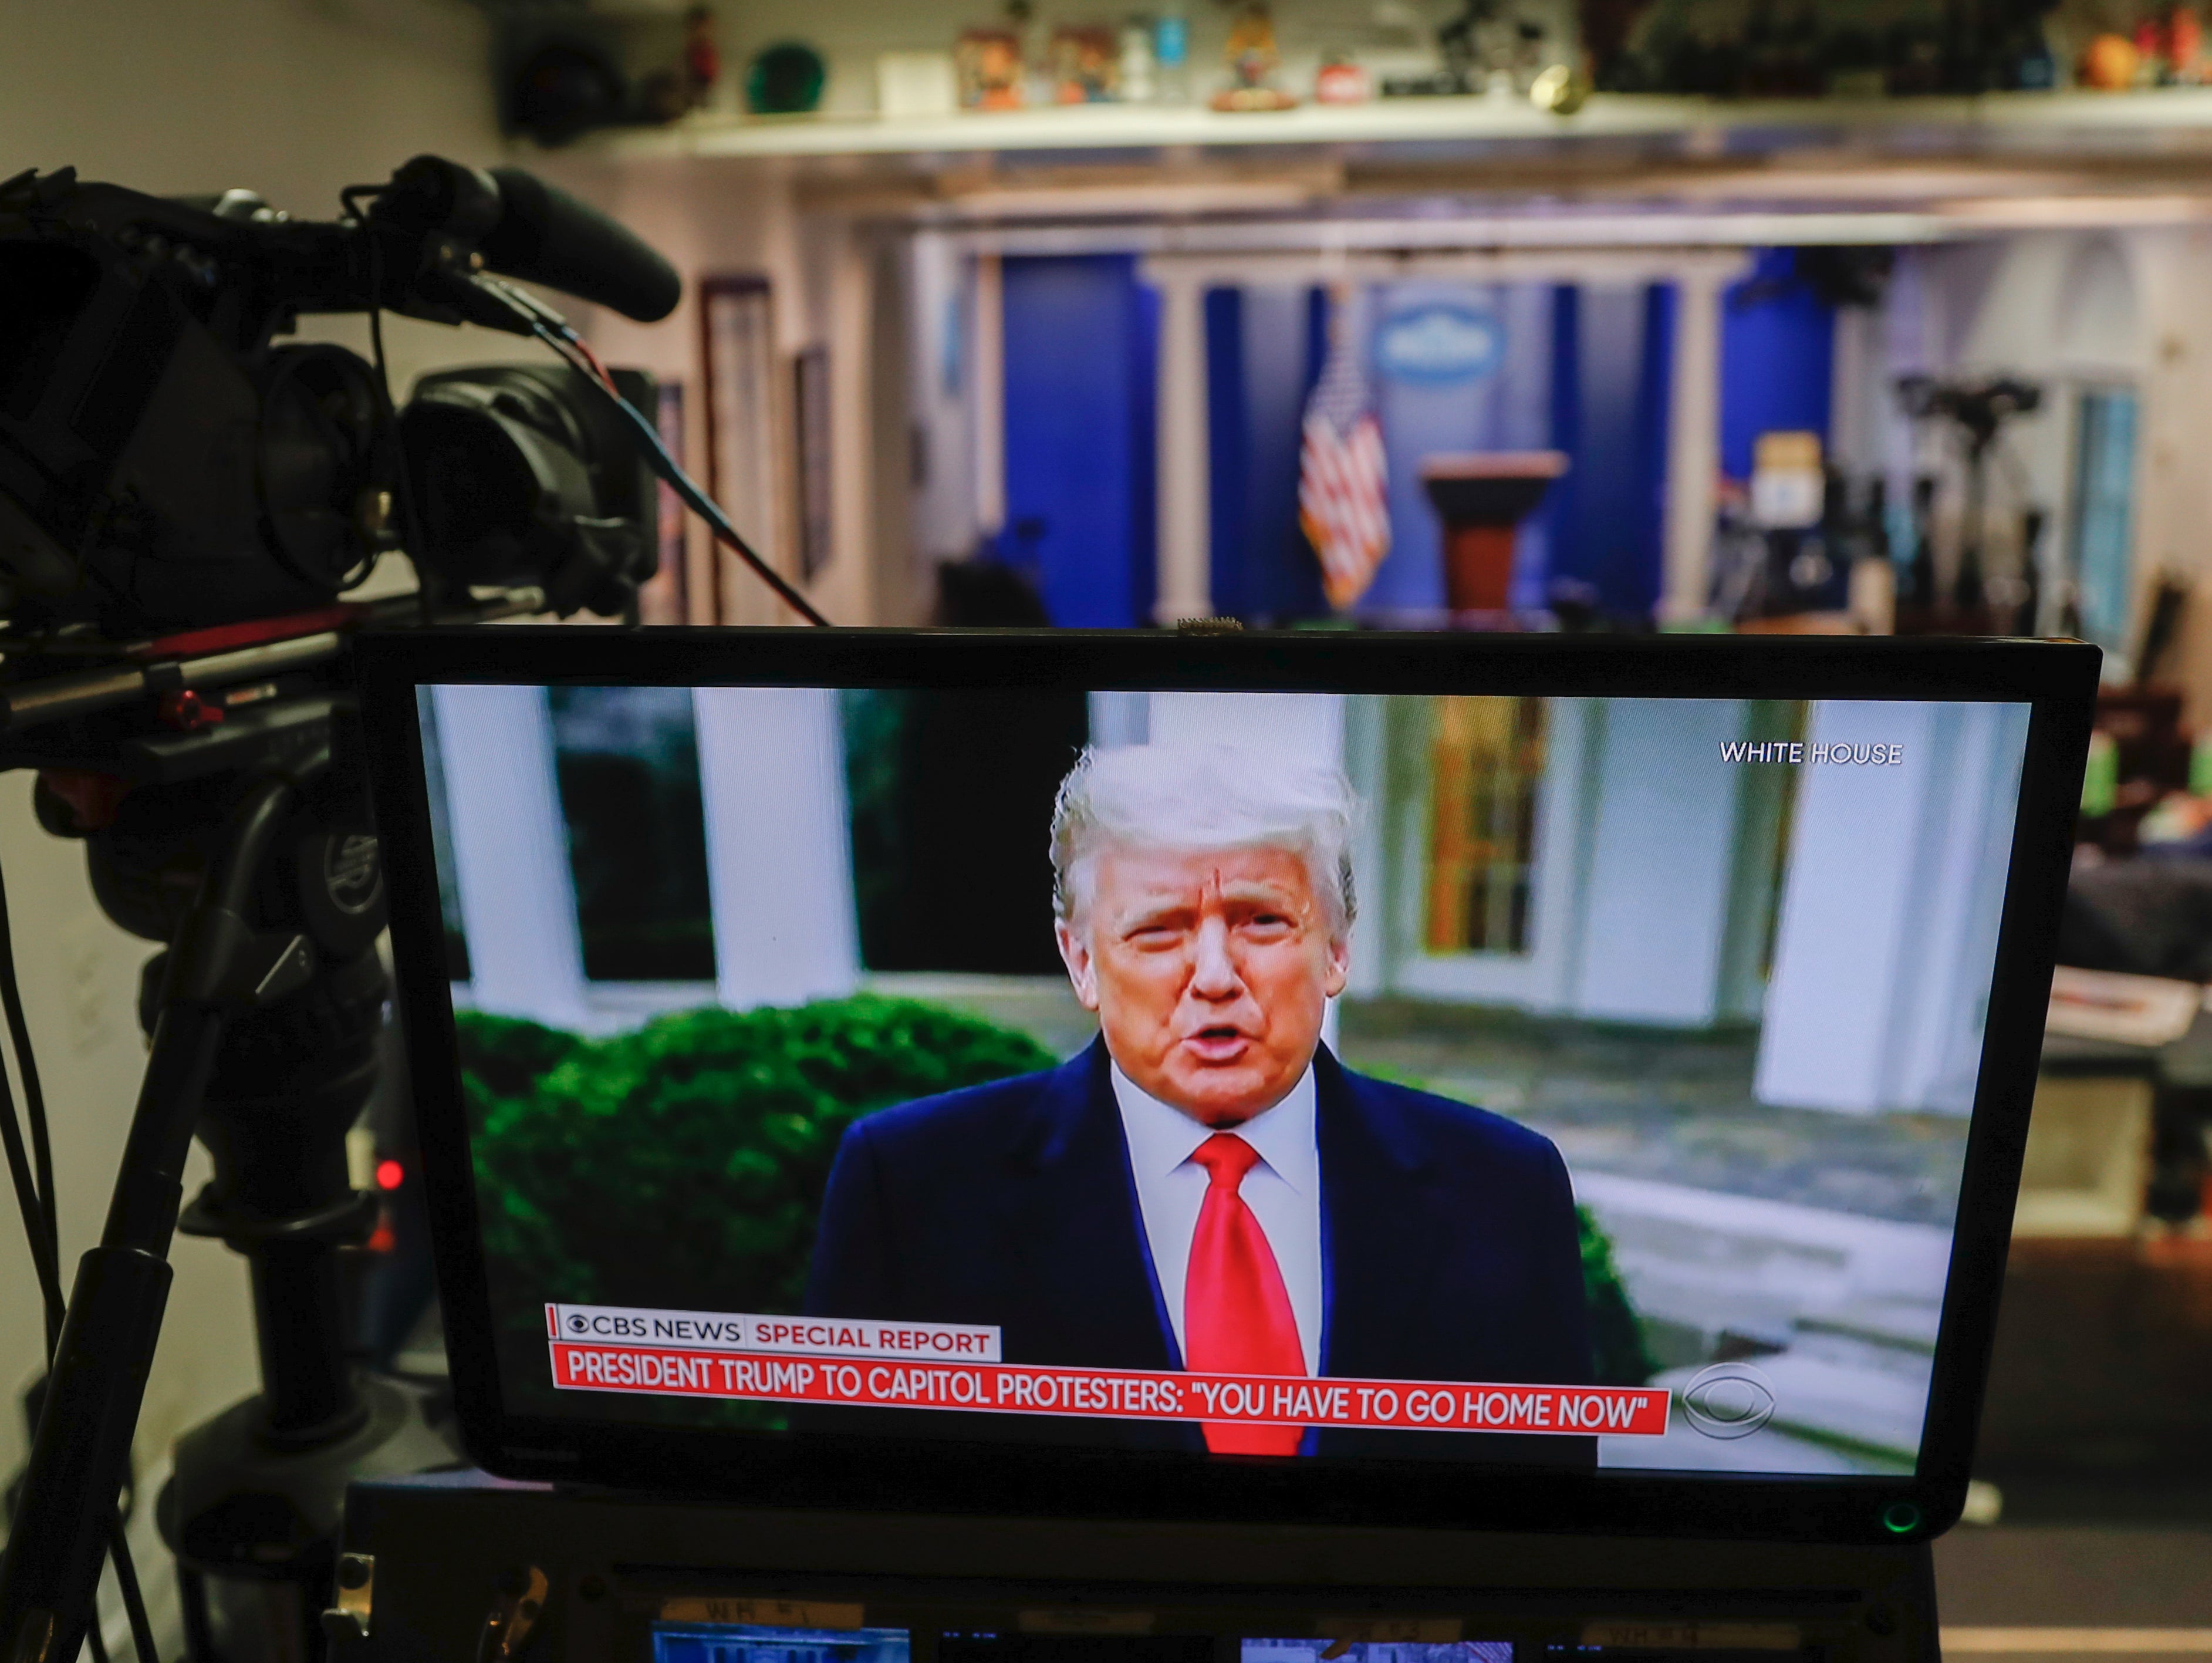 Donald Trump delivers video message distancing himself from events of 6 January 2021